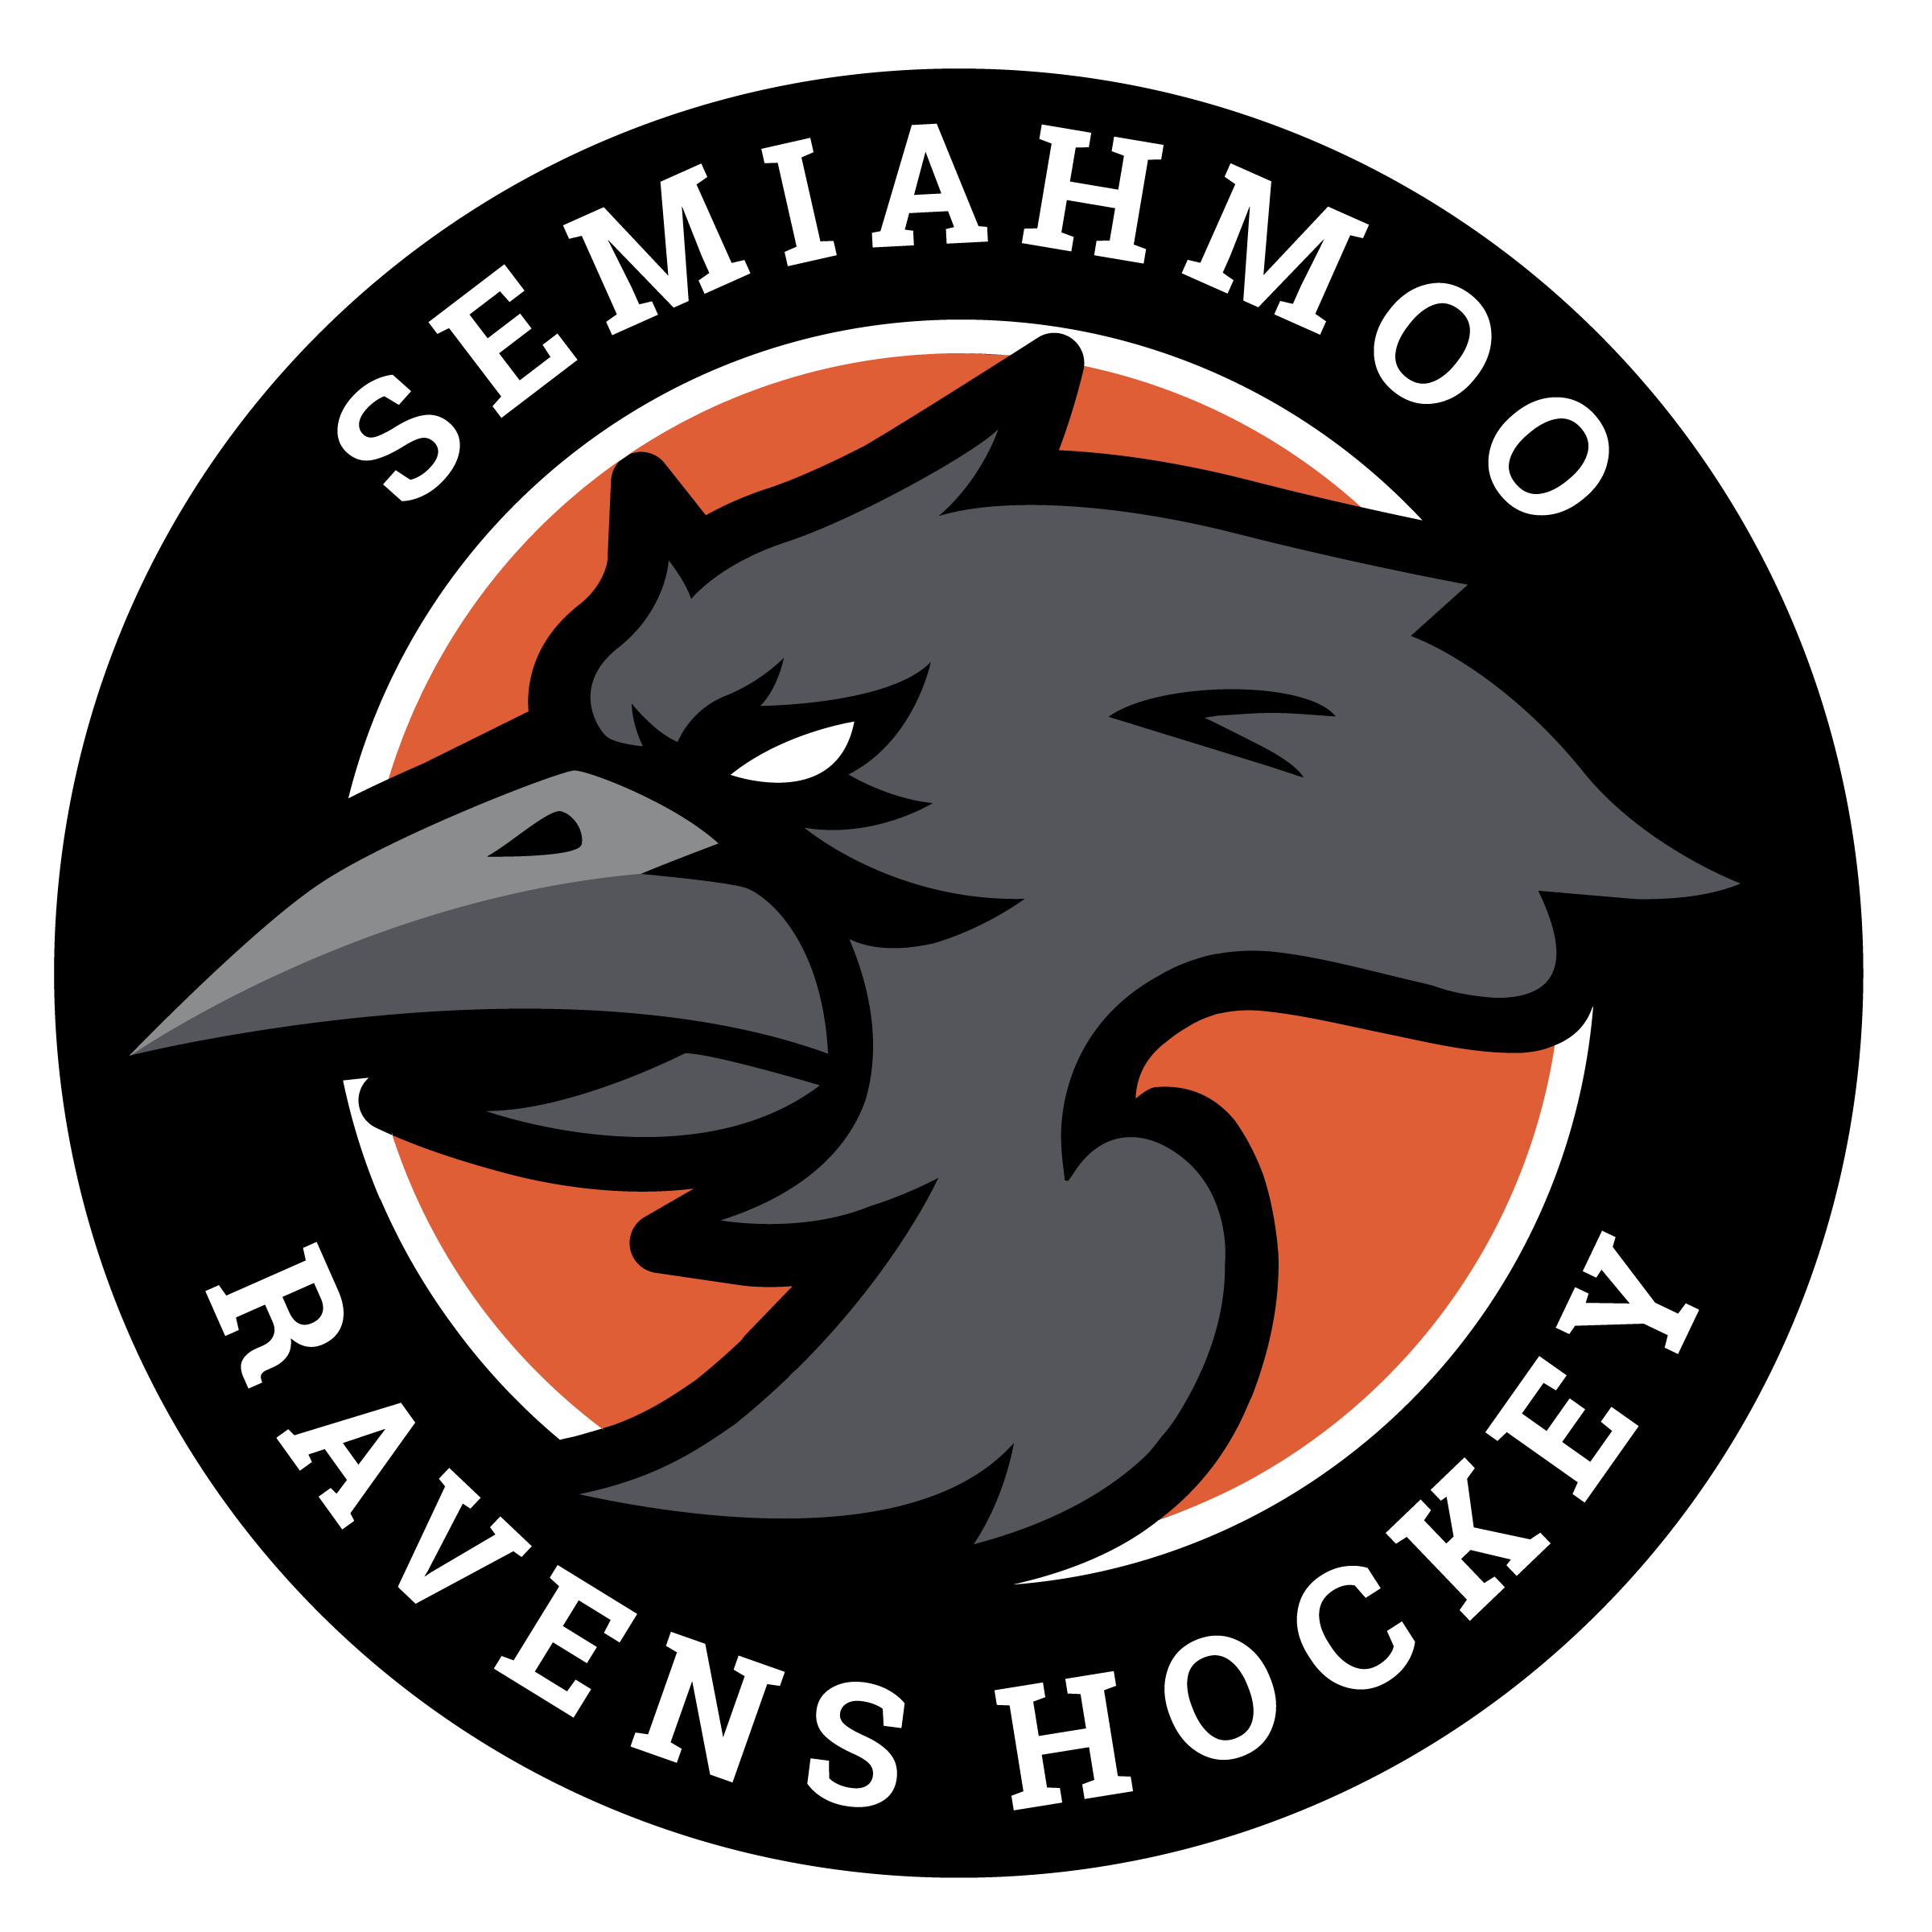 Semiahmoo Minor Hockey executive director recognized for work